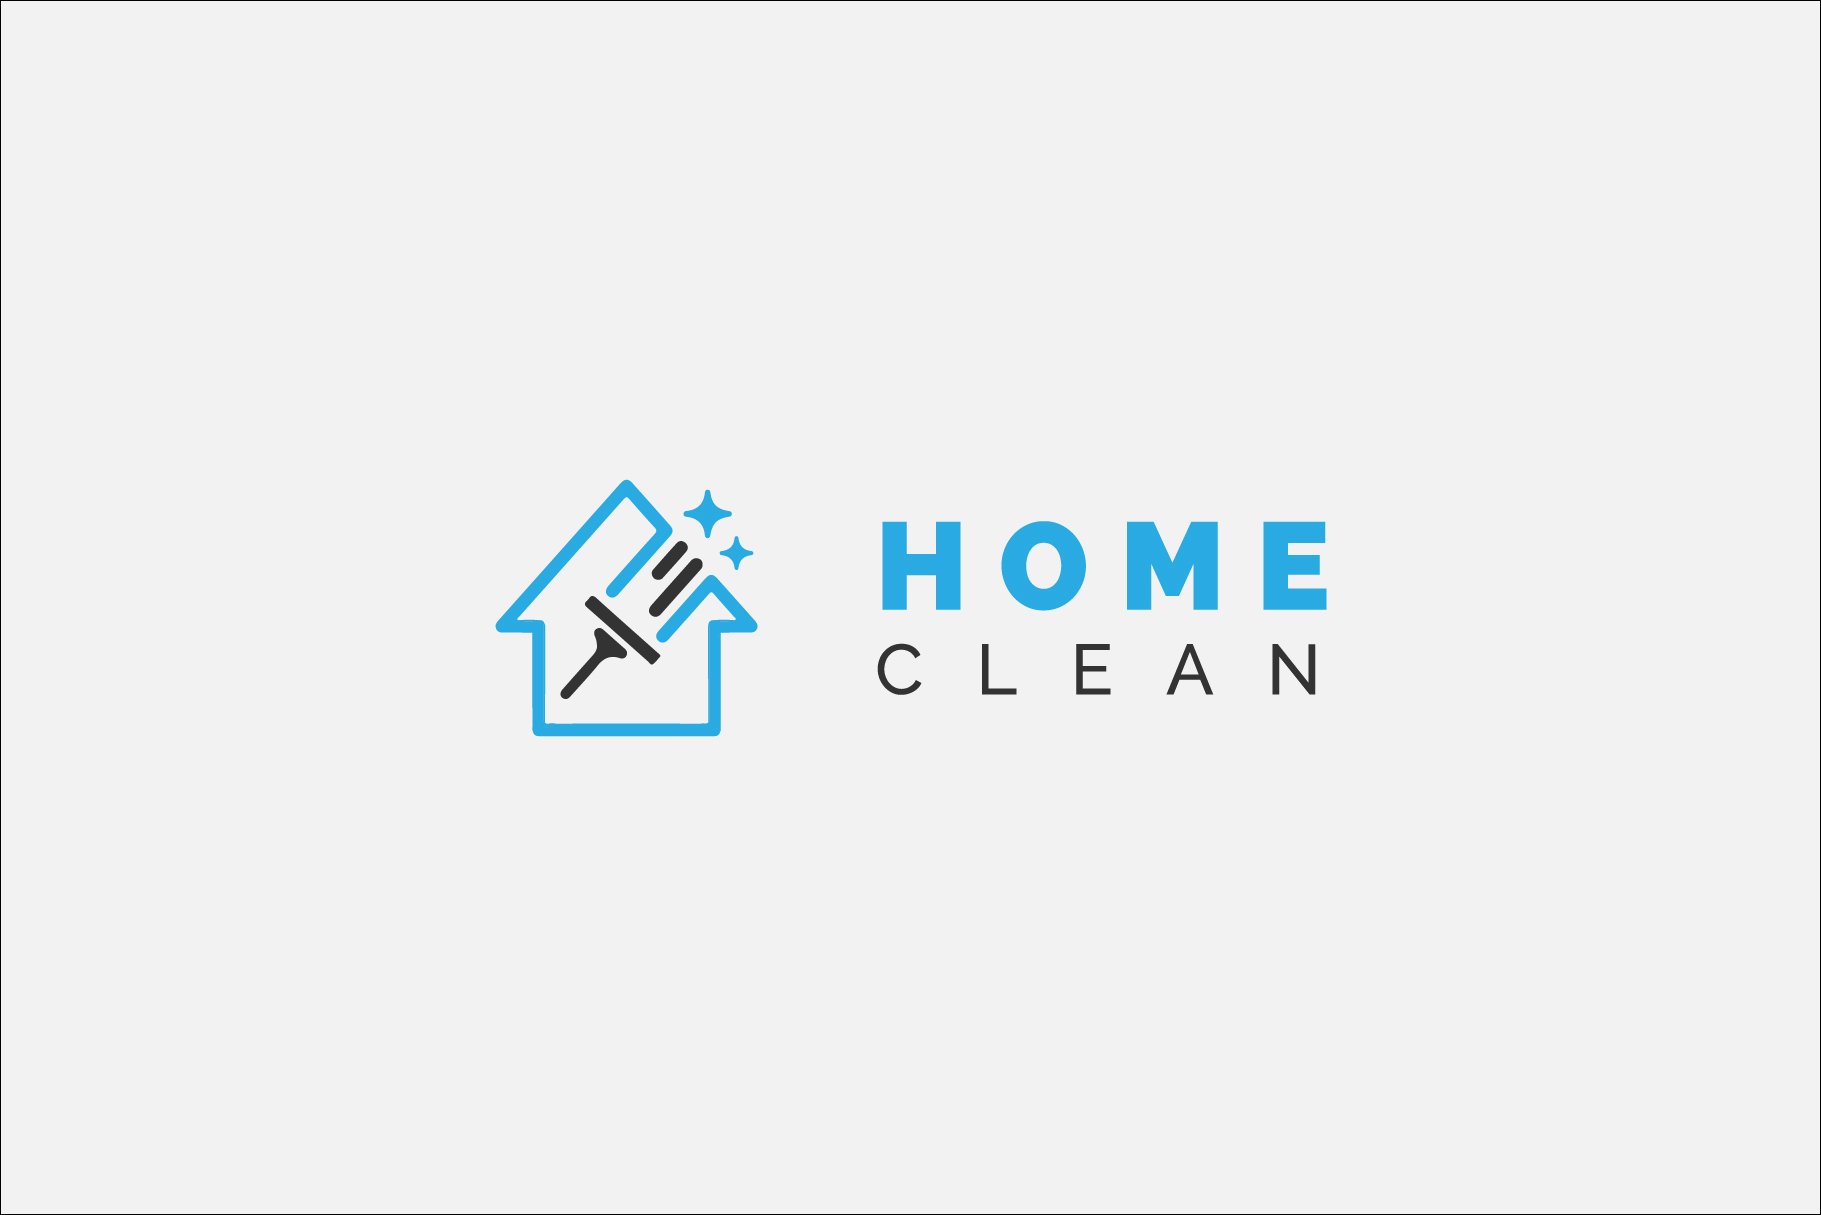 Cleaning Home Logo Icon Design Vecto cover image.